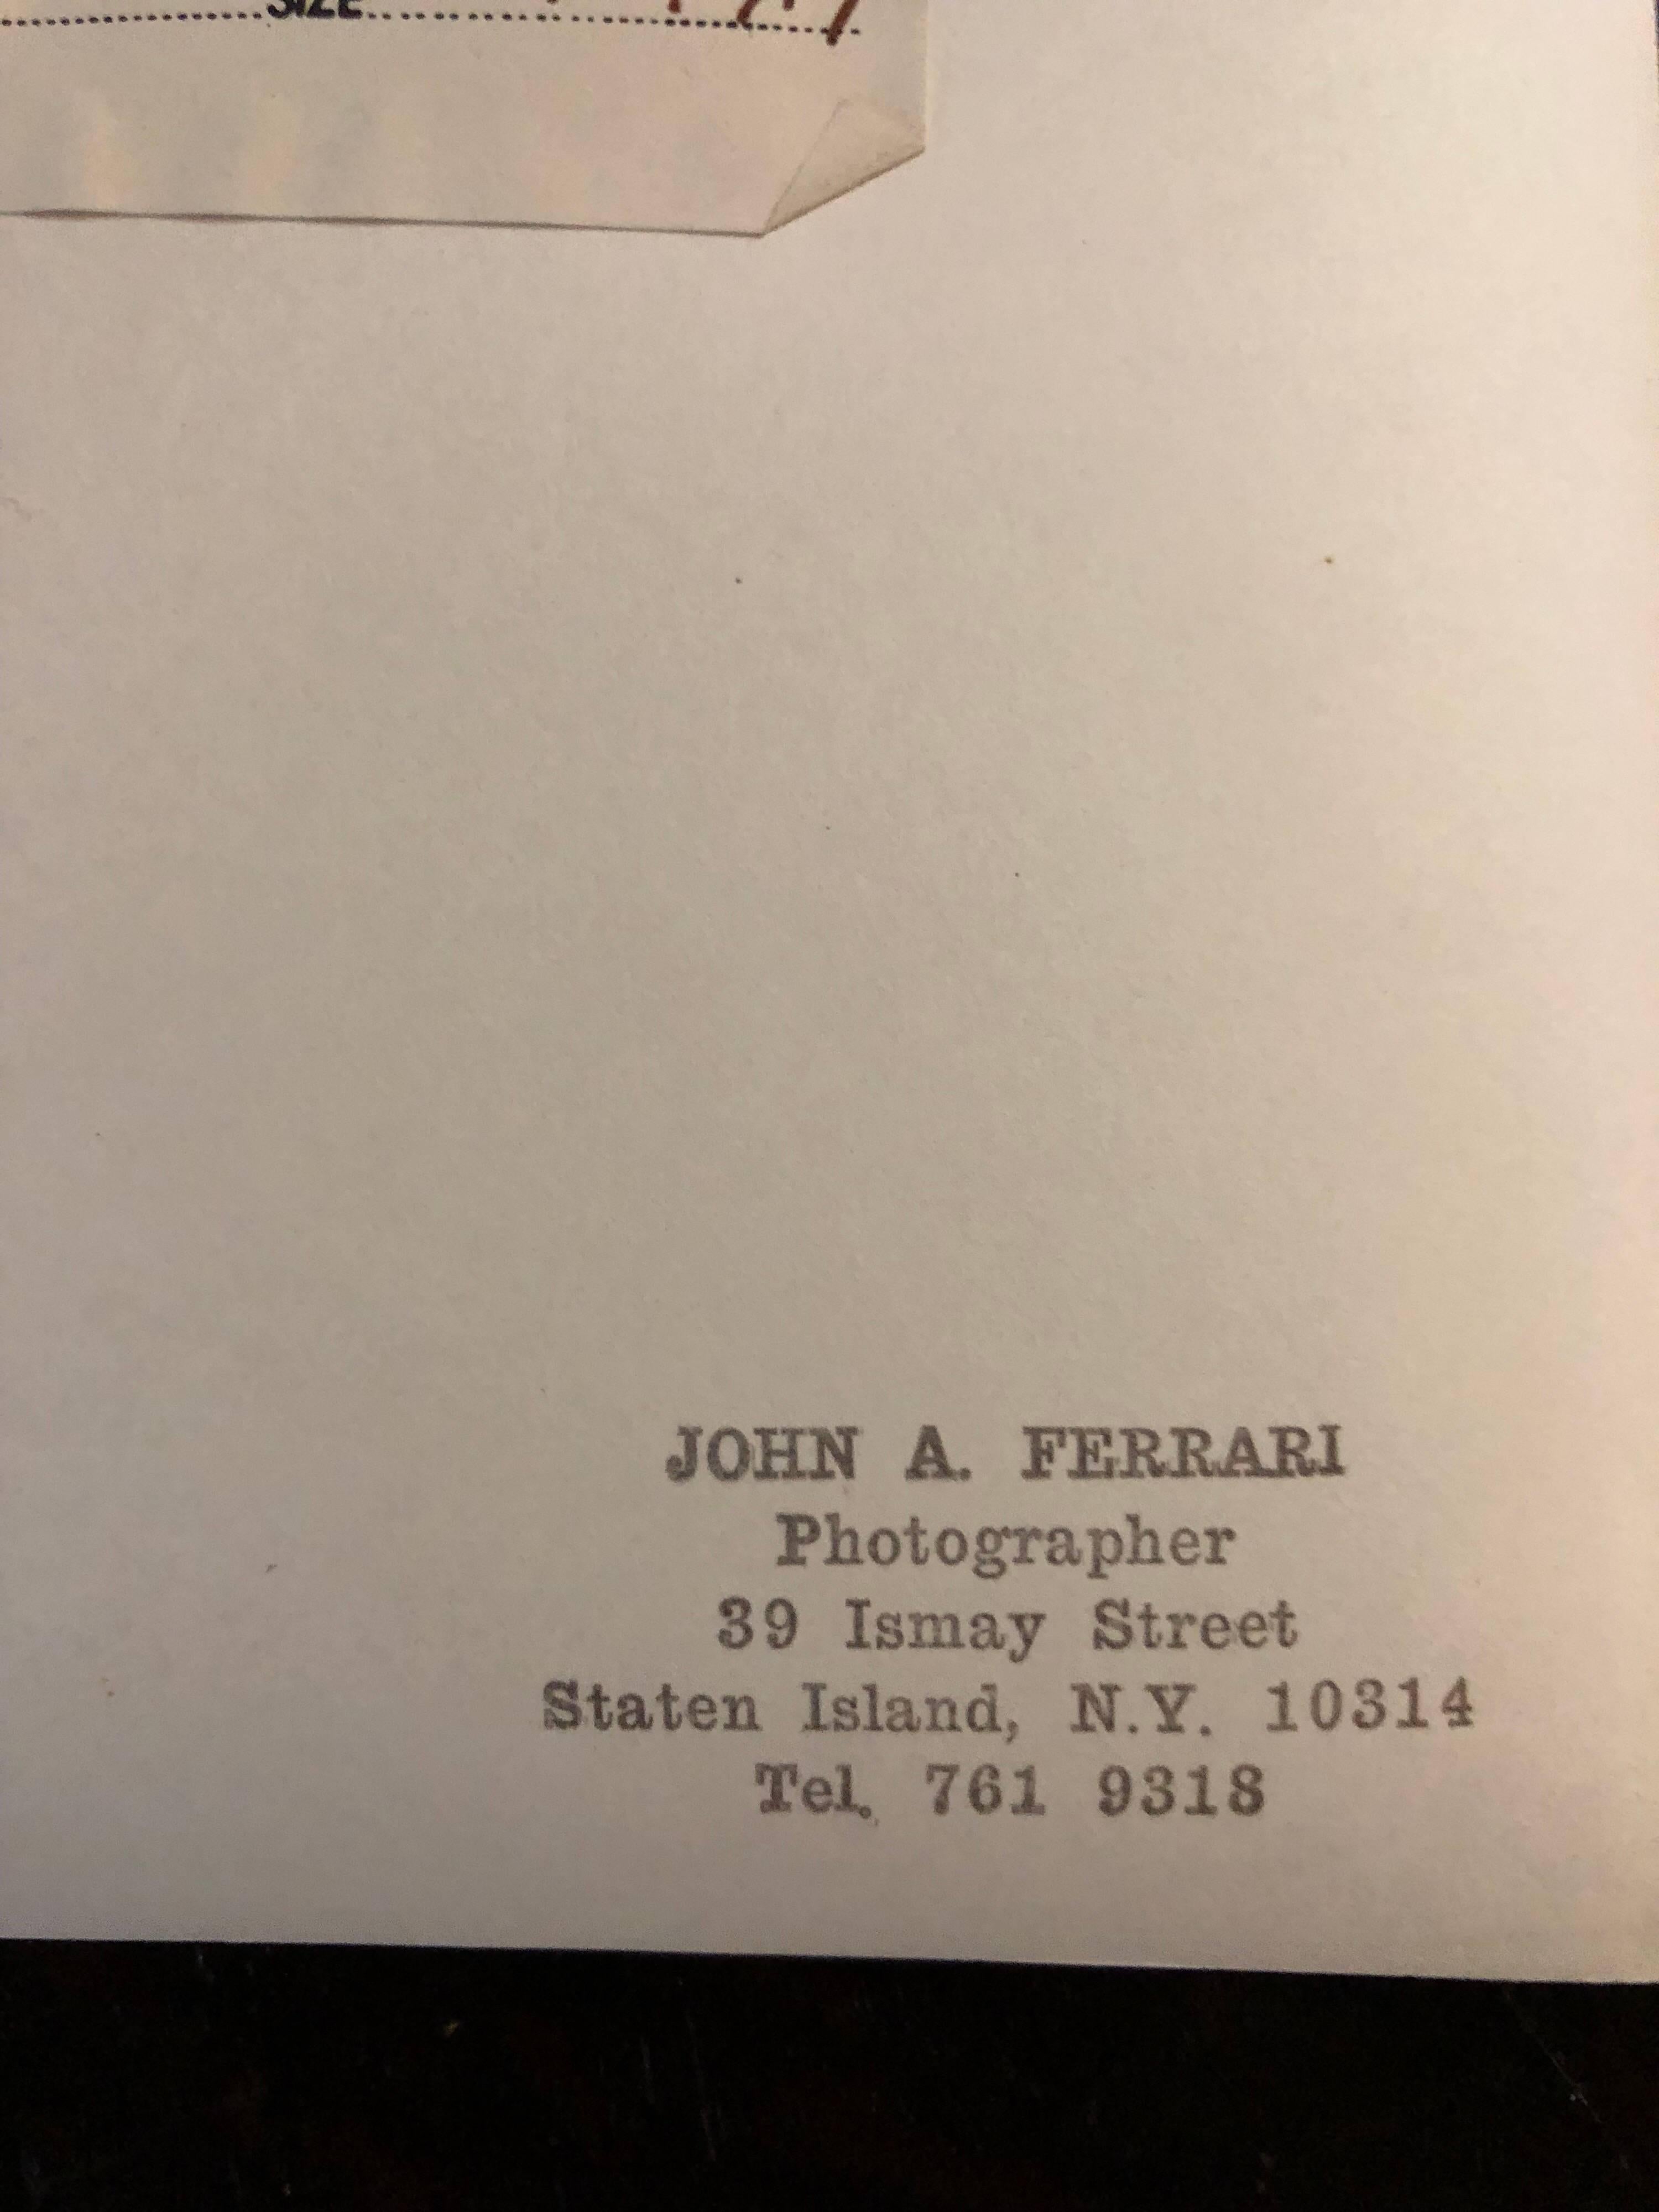 This is from the photogrpaher John A. Ferrari he shot work for Eva Hesse, Robert Mangold, Ronald Bladen and Sol Lewitt. It bears his stamp and label from Zabriskie Gallery. 
This is for the original vintage photograph. I believe the inscription is